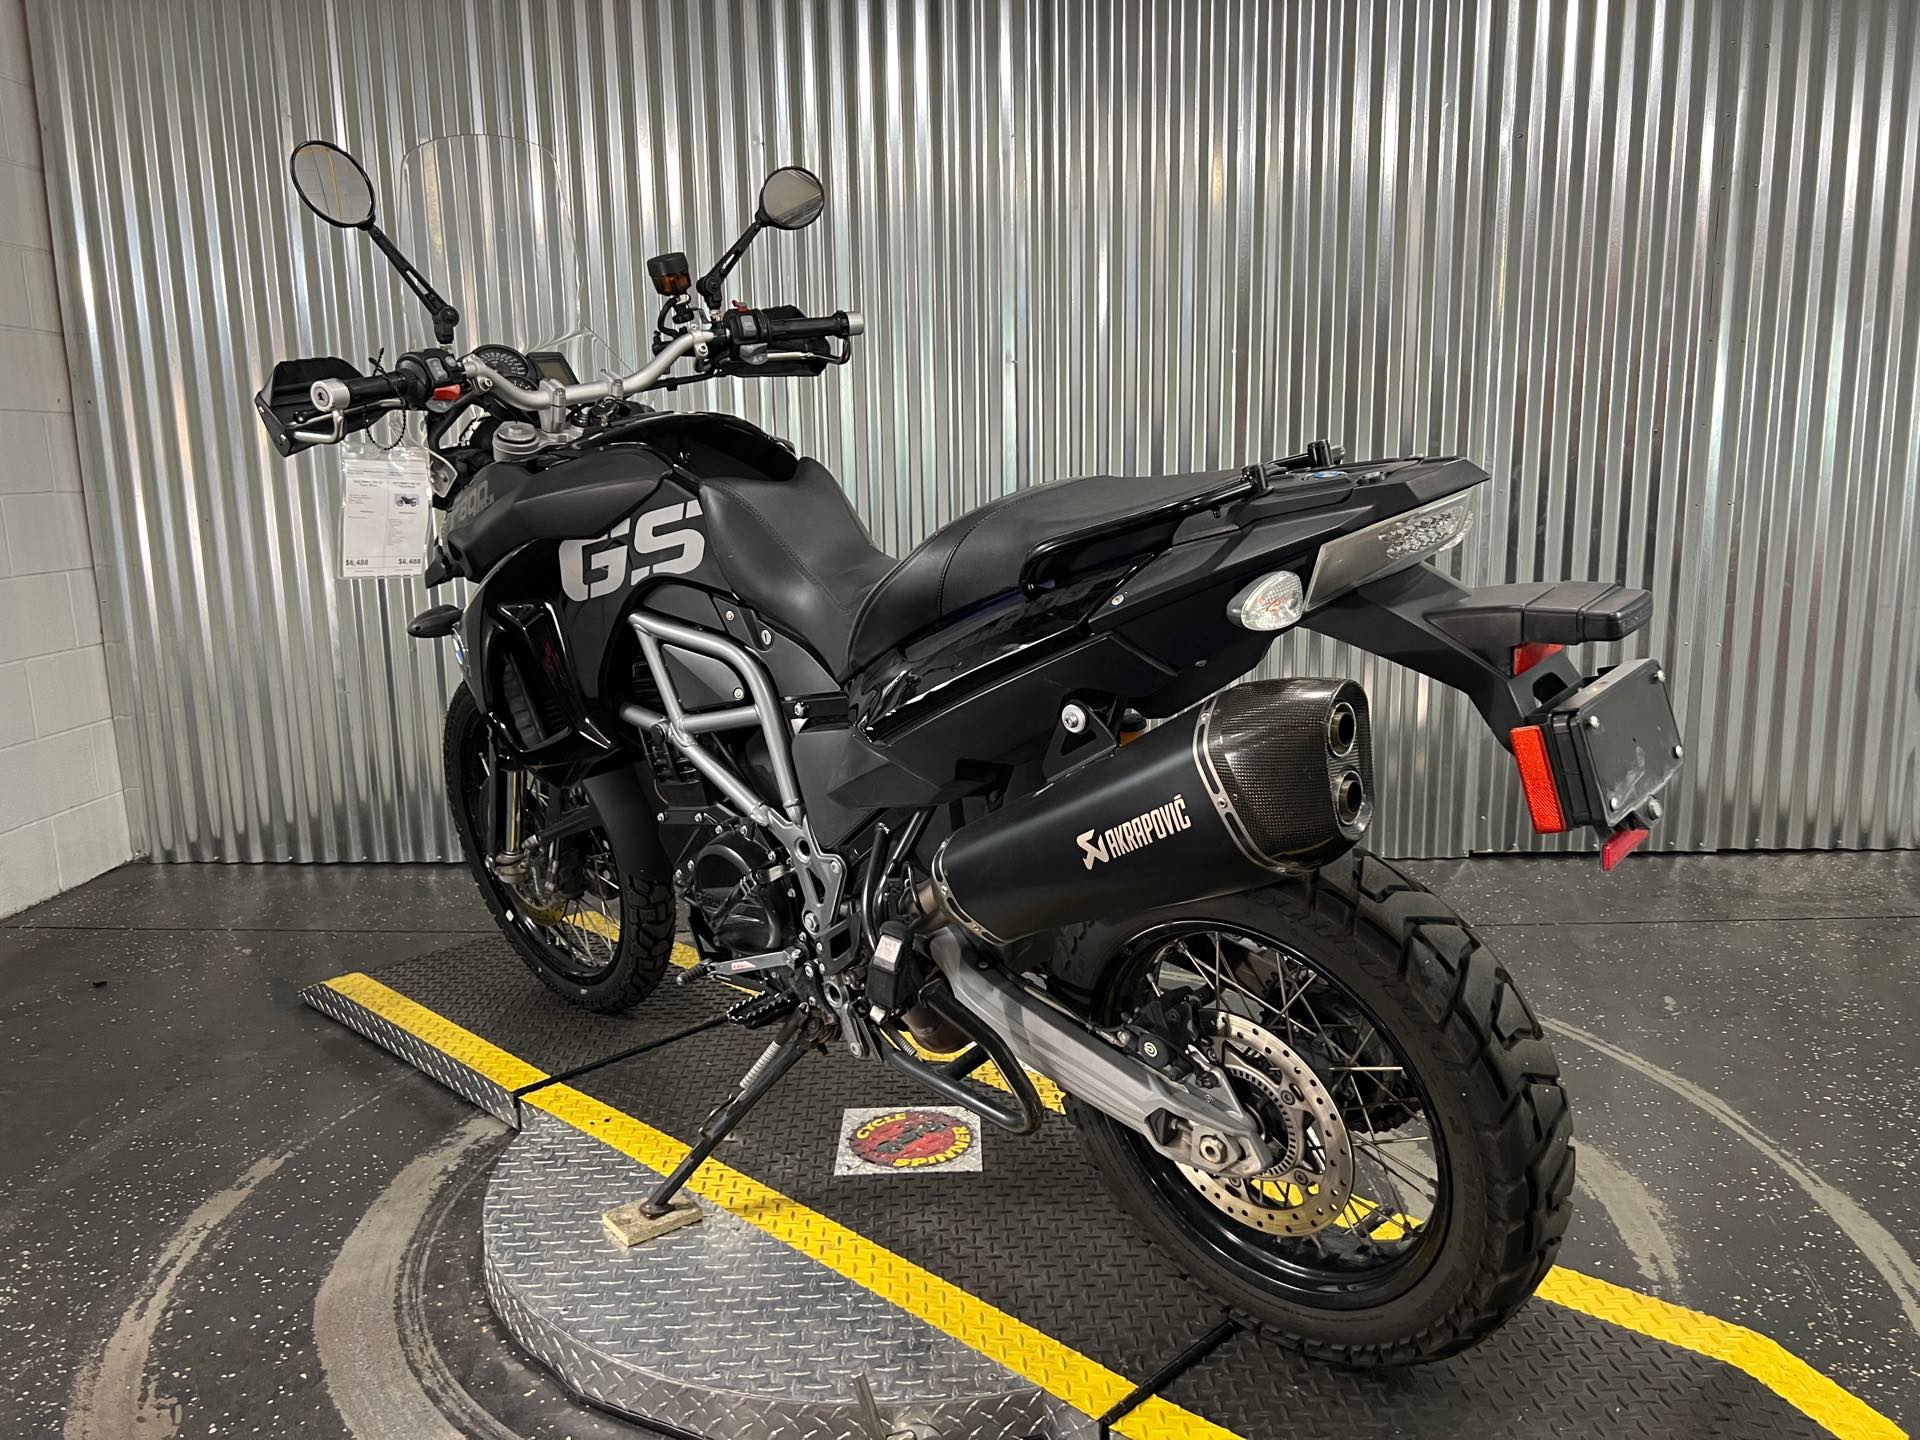 2012 BMW F 800 GS 800 GS Triple Black at Teddy Morse Grand Junction Powersports